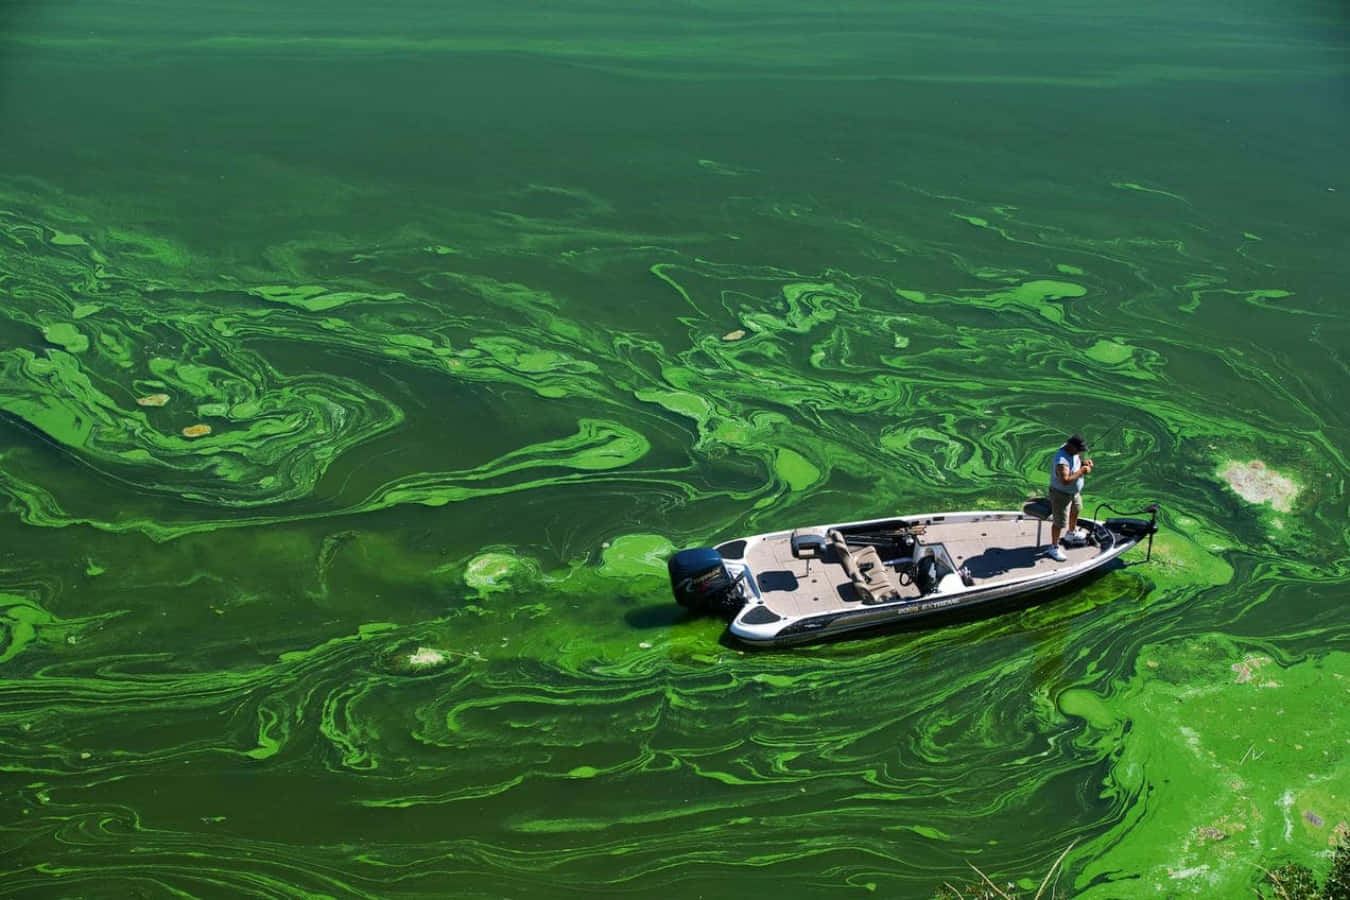 A Man Is On A Boat In A Lake With Green Algae